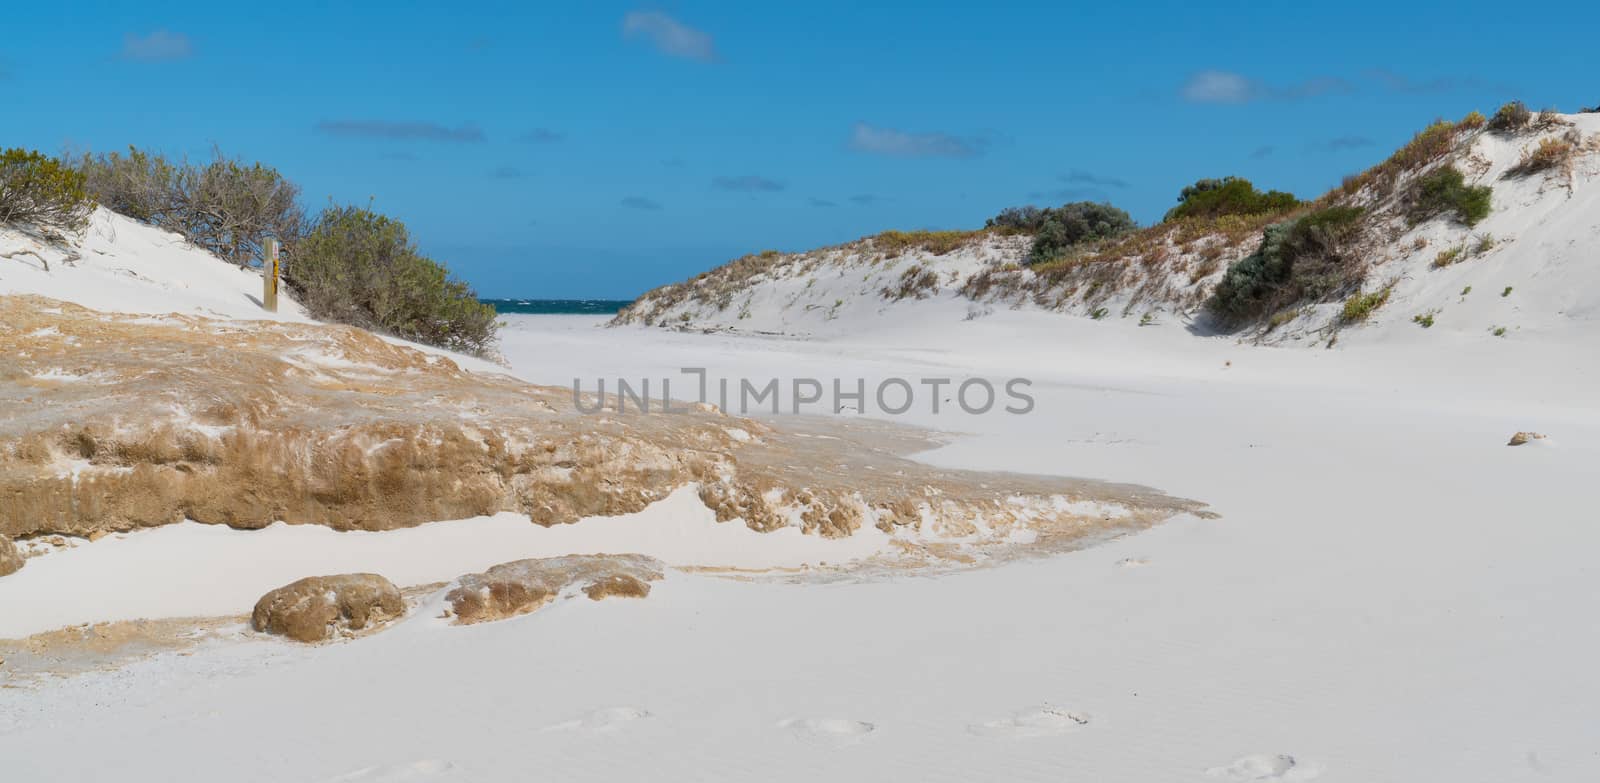 Mileys Beach, beautiful place within the Fitzgerald River National Park, Western Australia